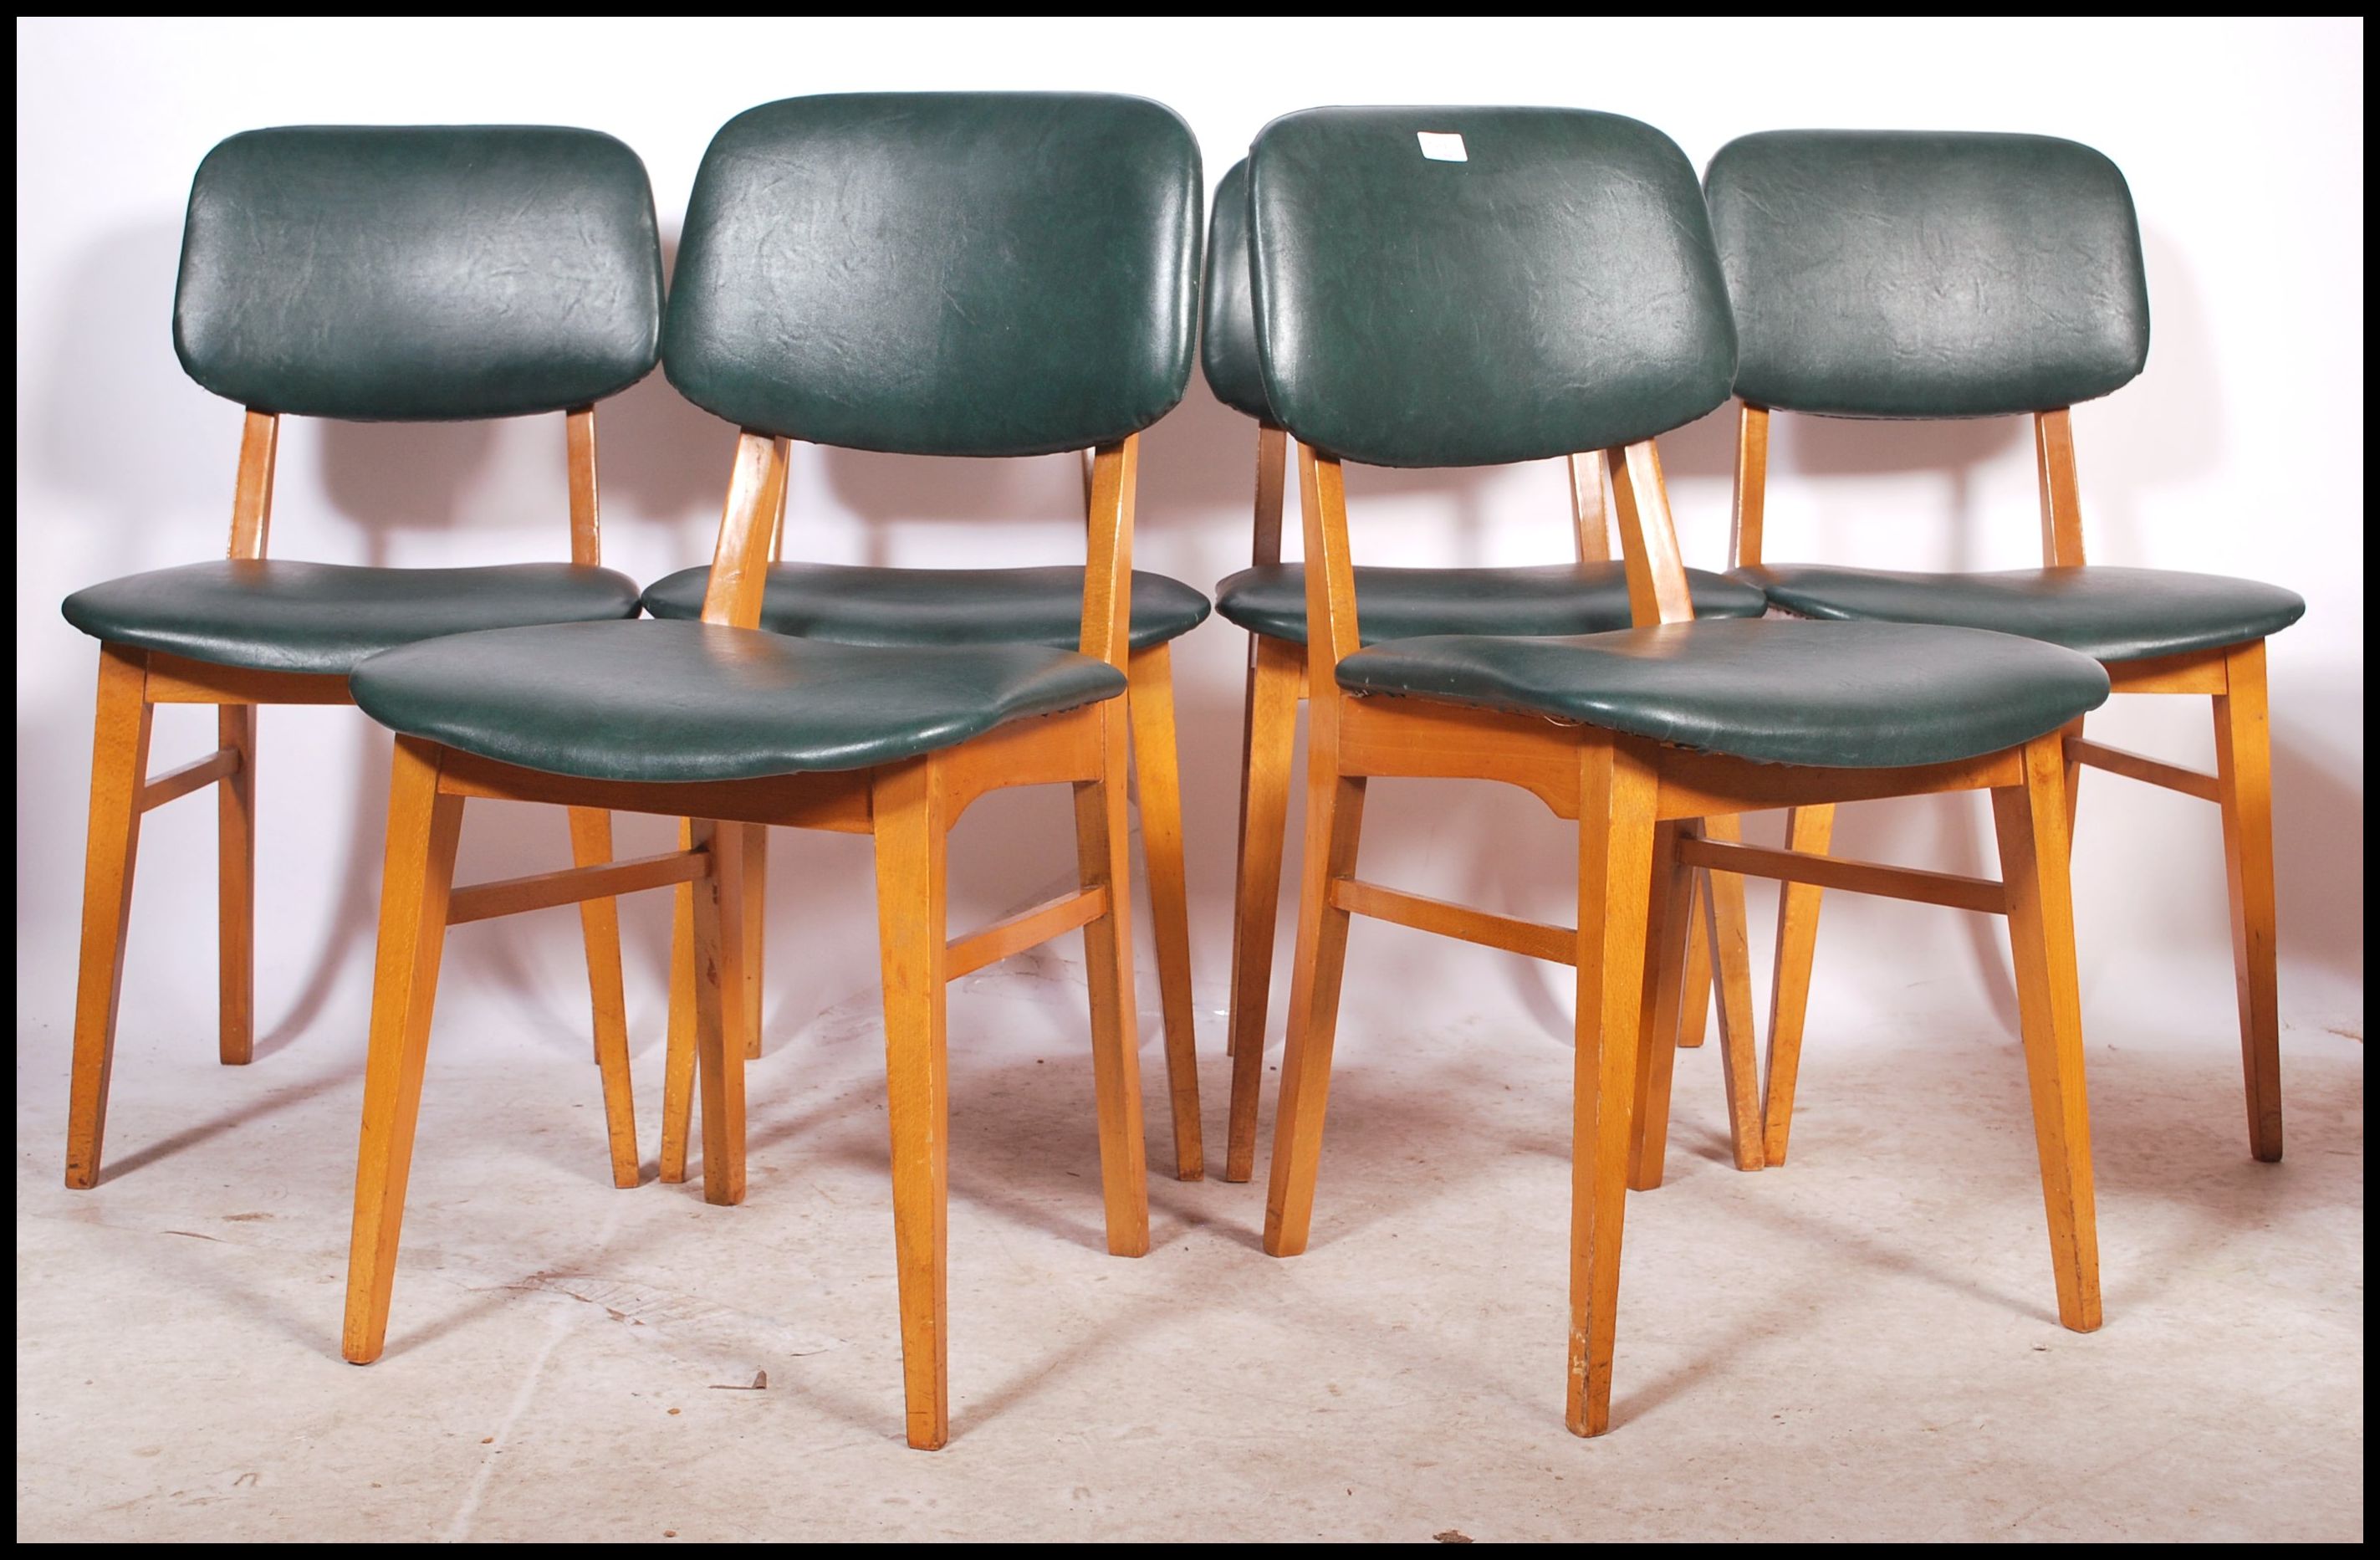 A set of 14 retro dinette utility style dining chairs / cafe chairs each with green padded seats and